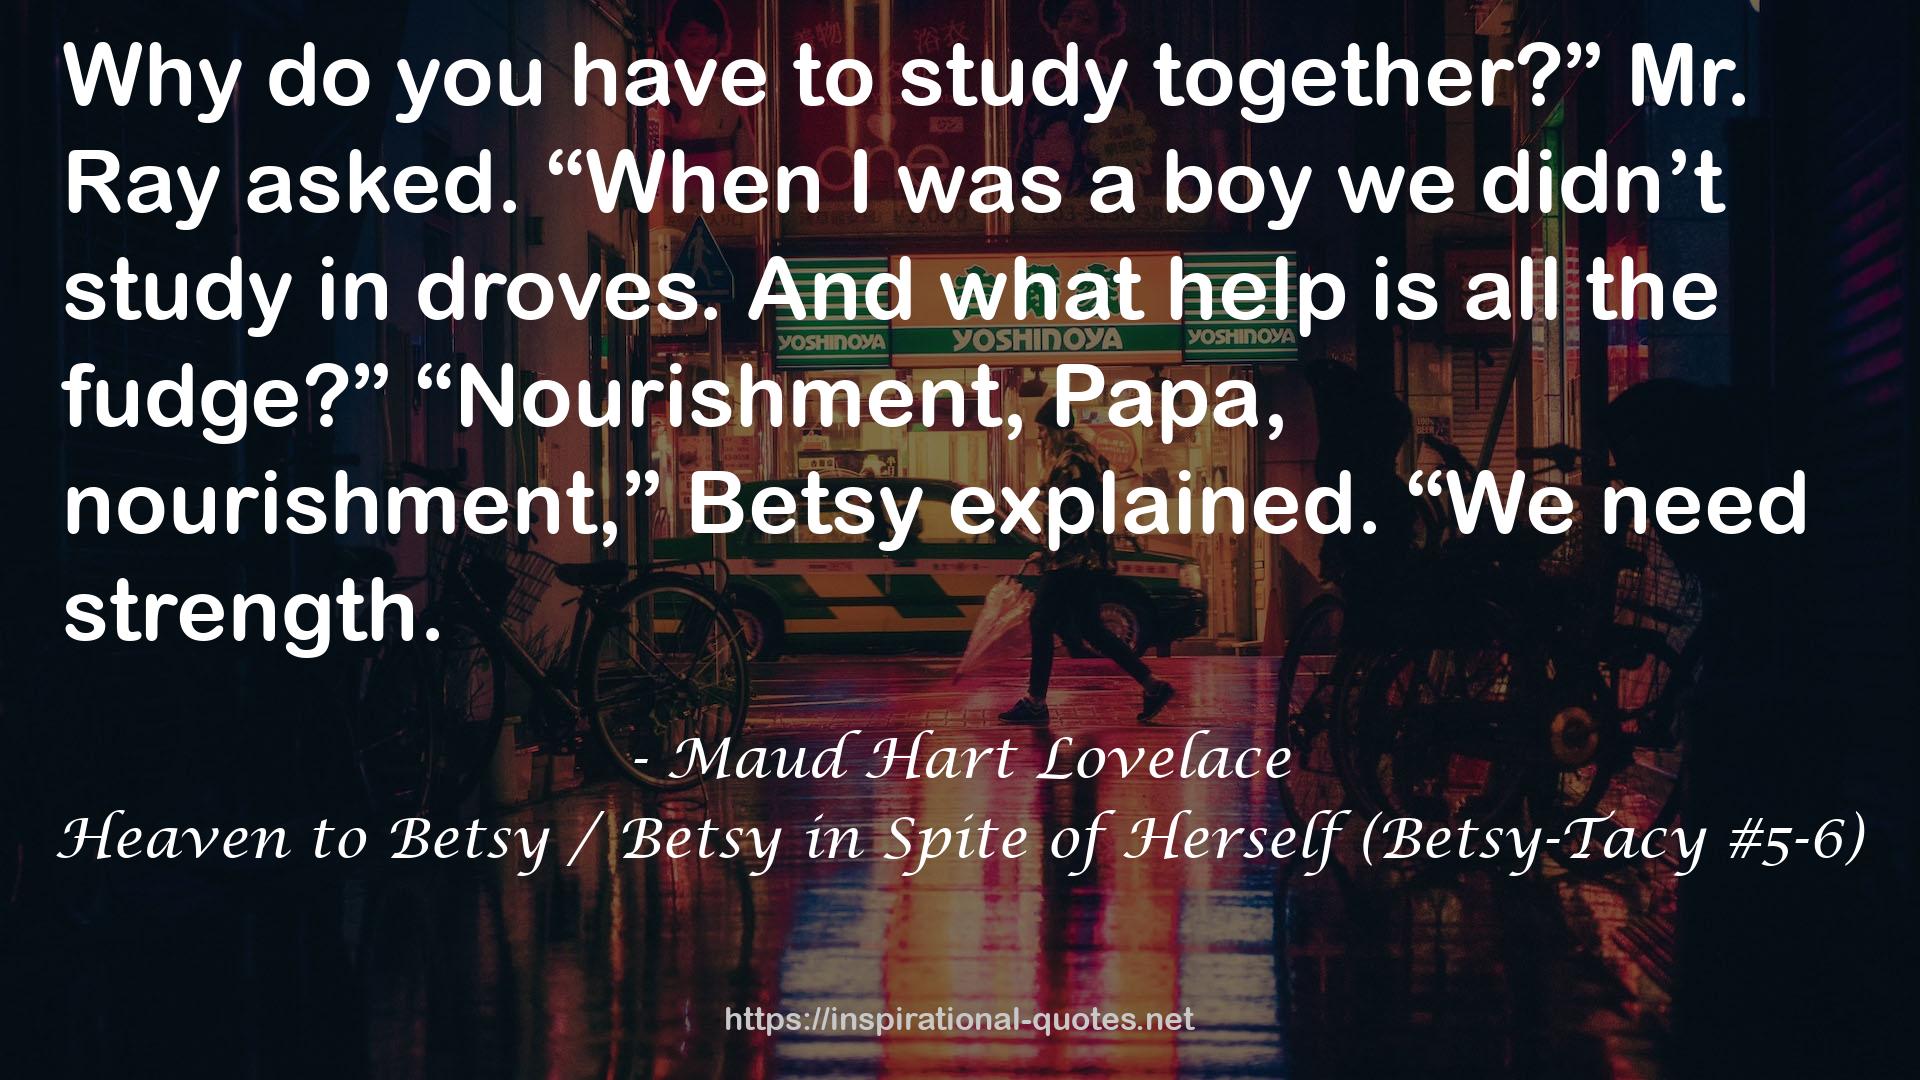 Heaven to Betsy / Betsy in Spite of Herself (Betsy-Tacy #5-6) QUOTES